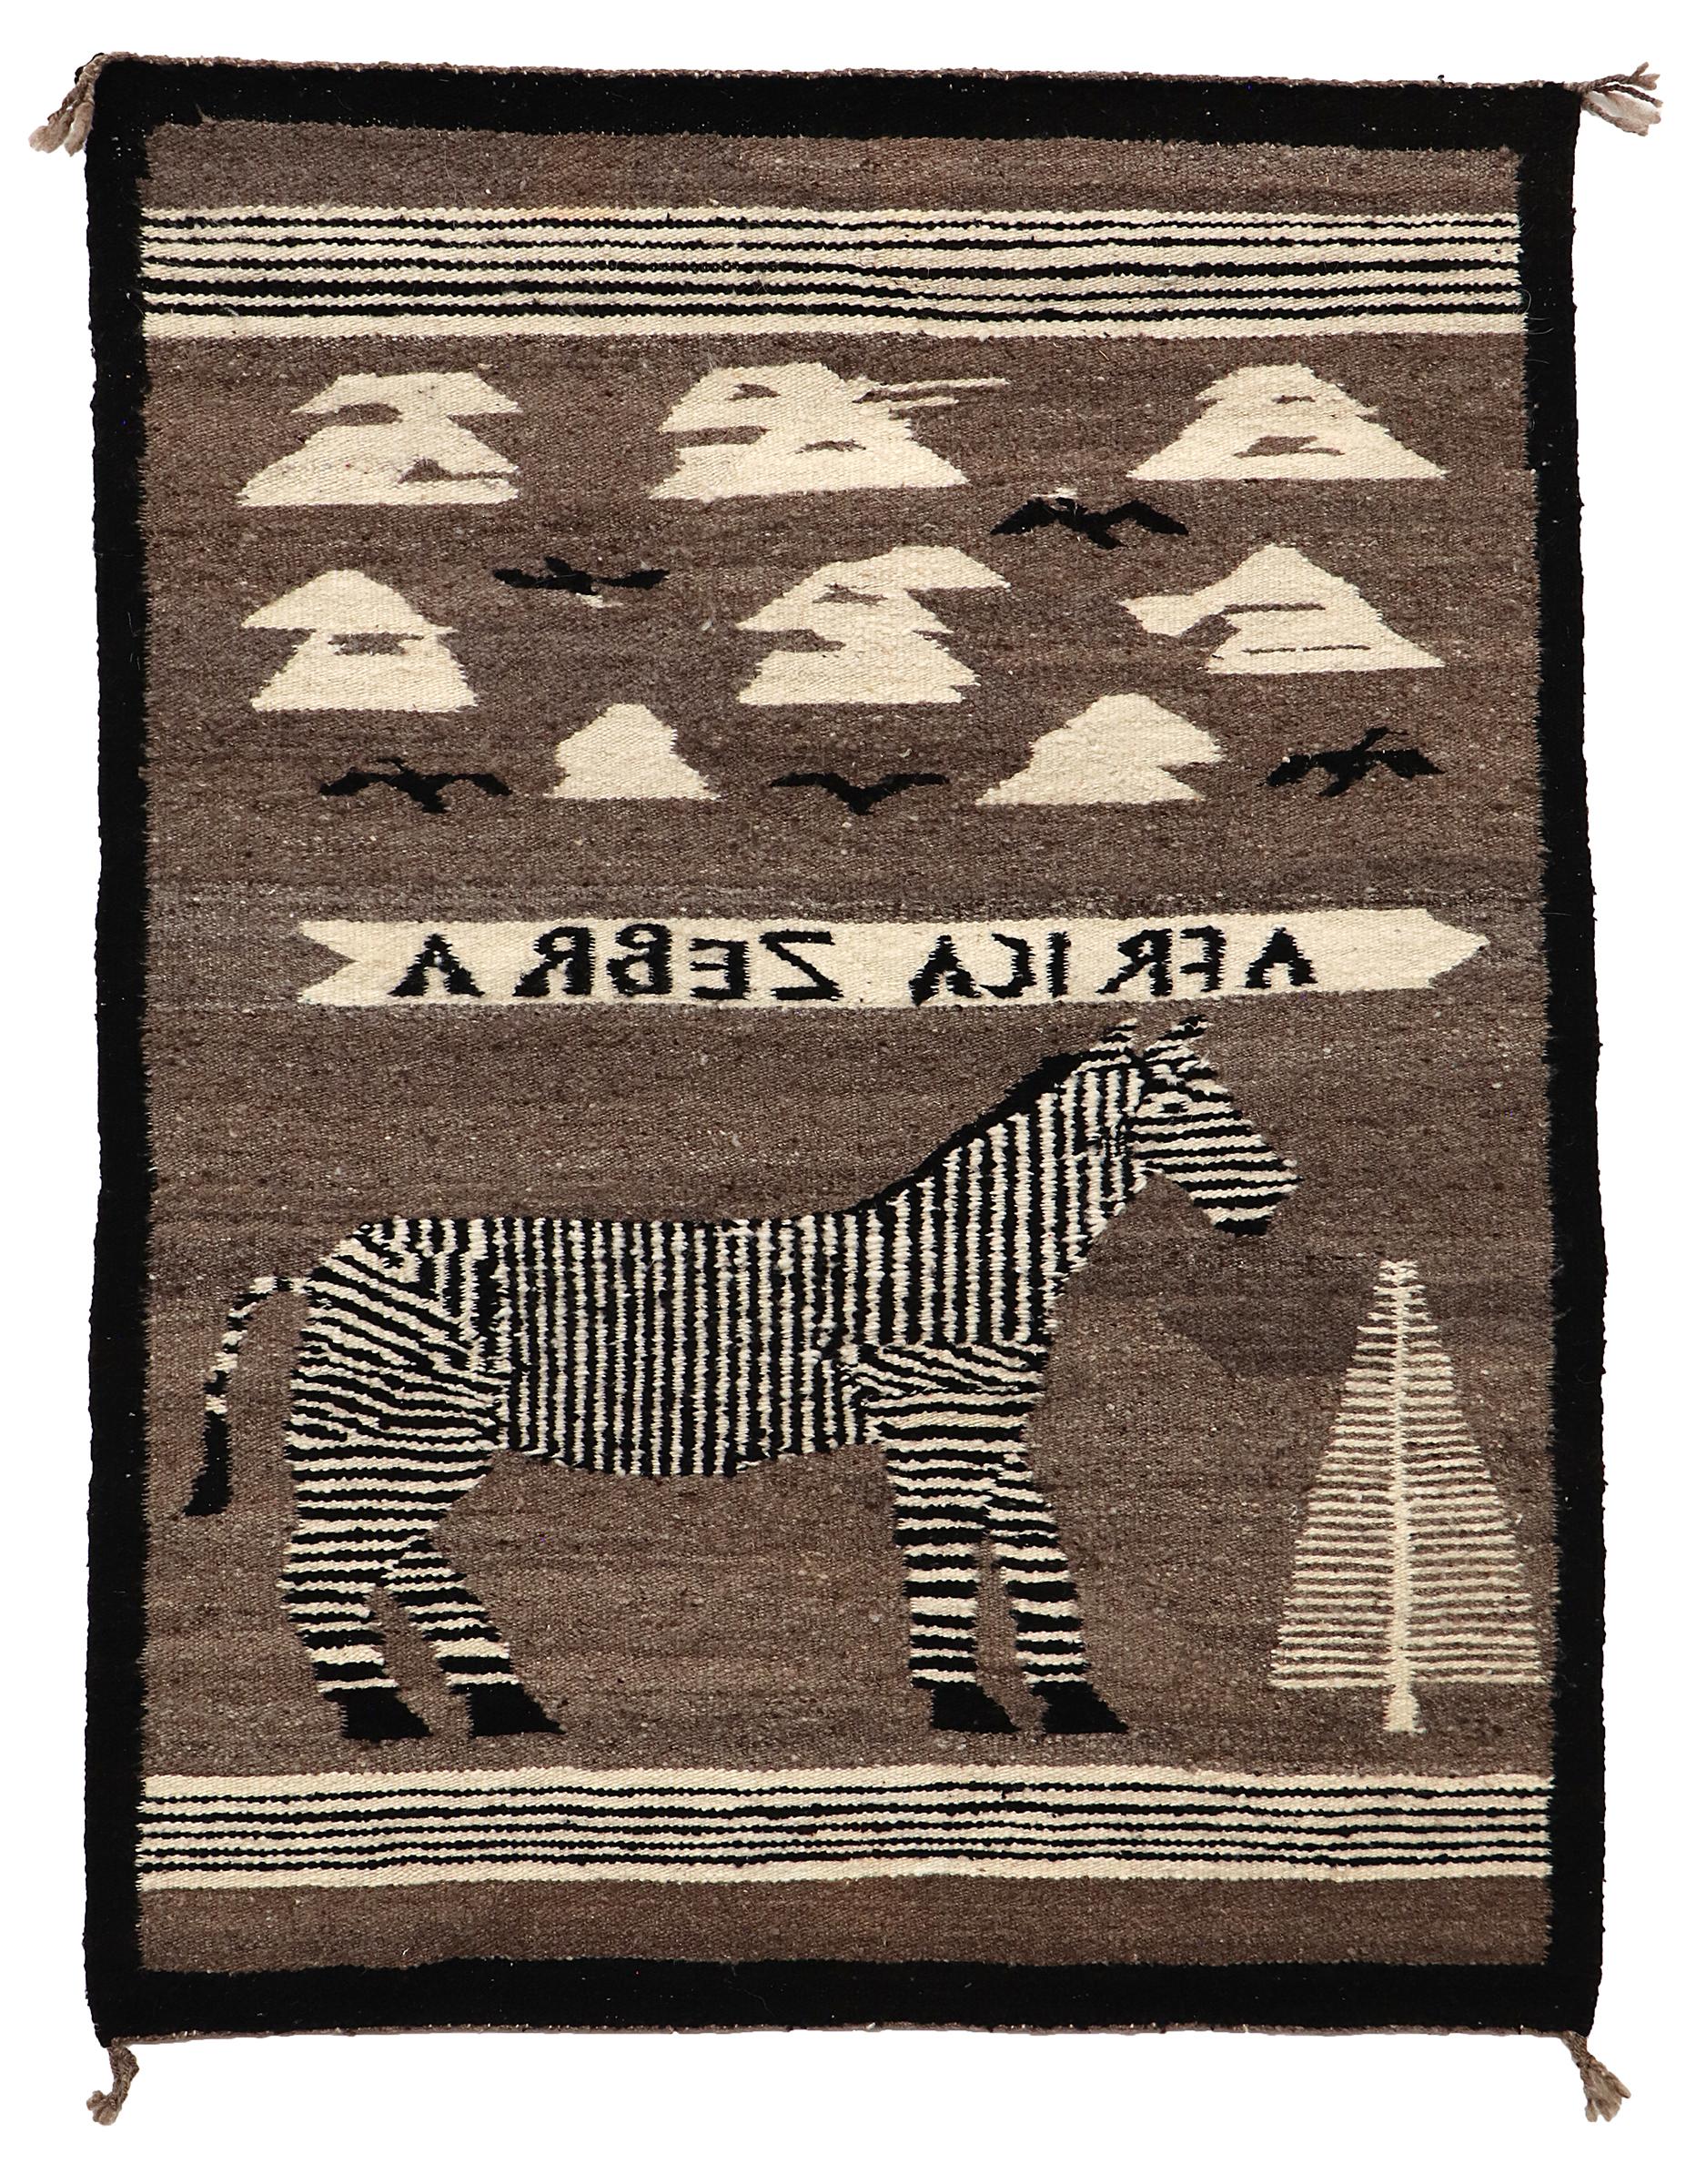 Vintage 1950s Pictorial Navajo Rug. Pictorial elements in this hand-woven textile include an African Zebra, tree, clouds and birds along with the words,  